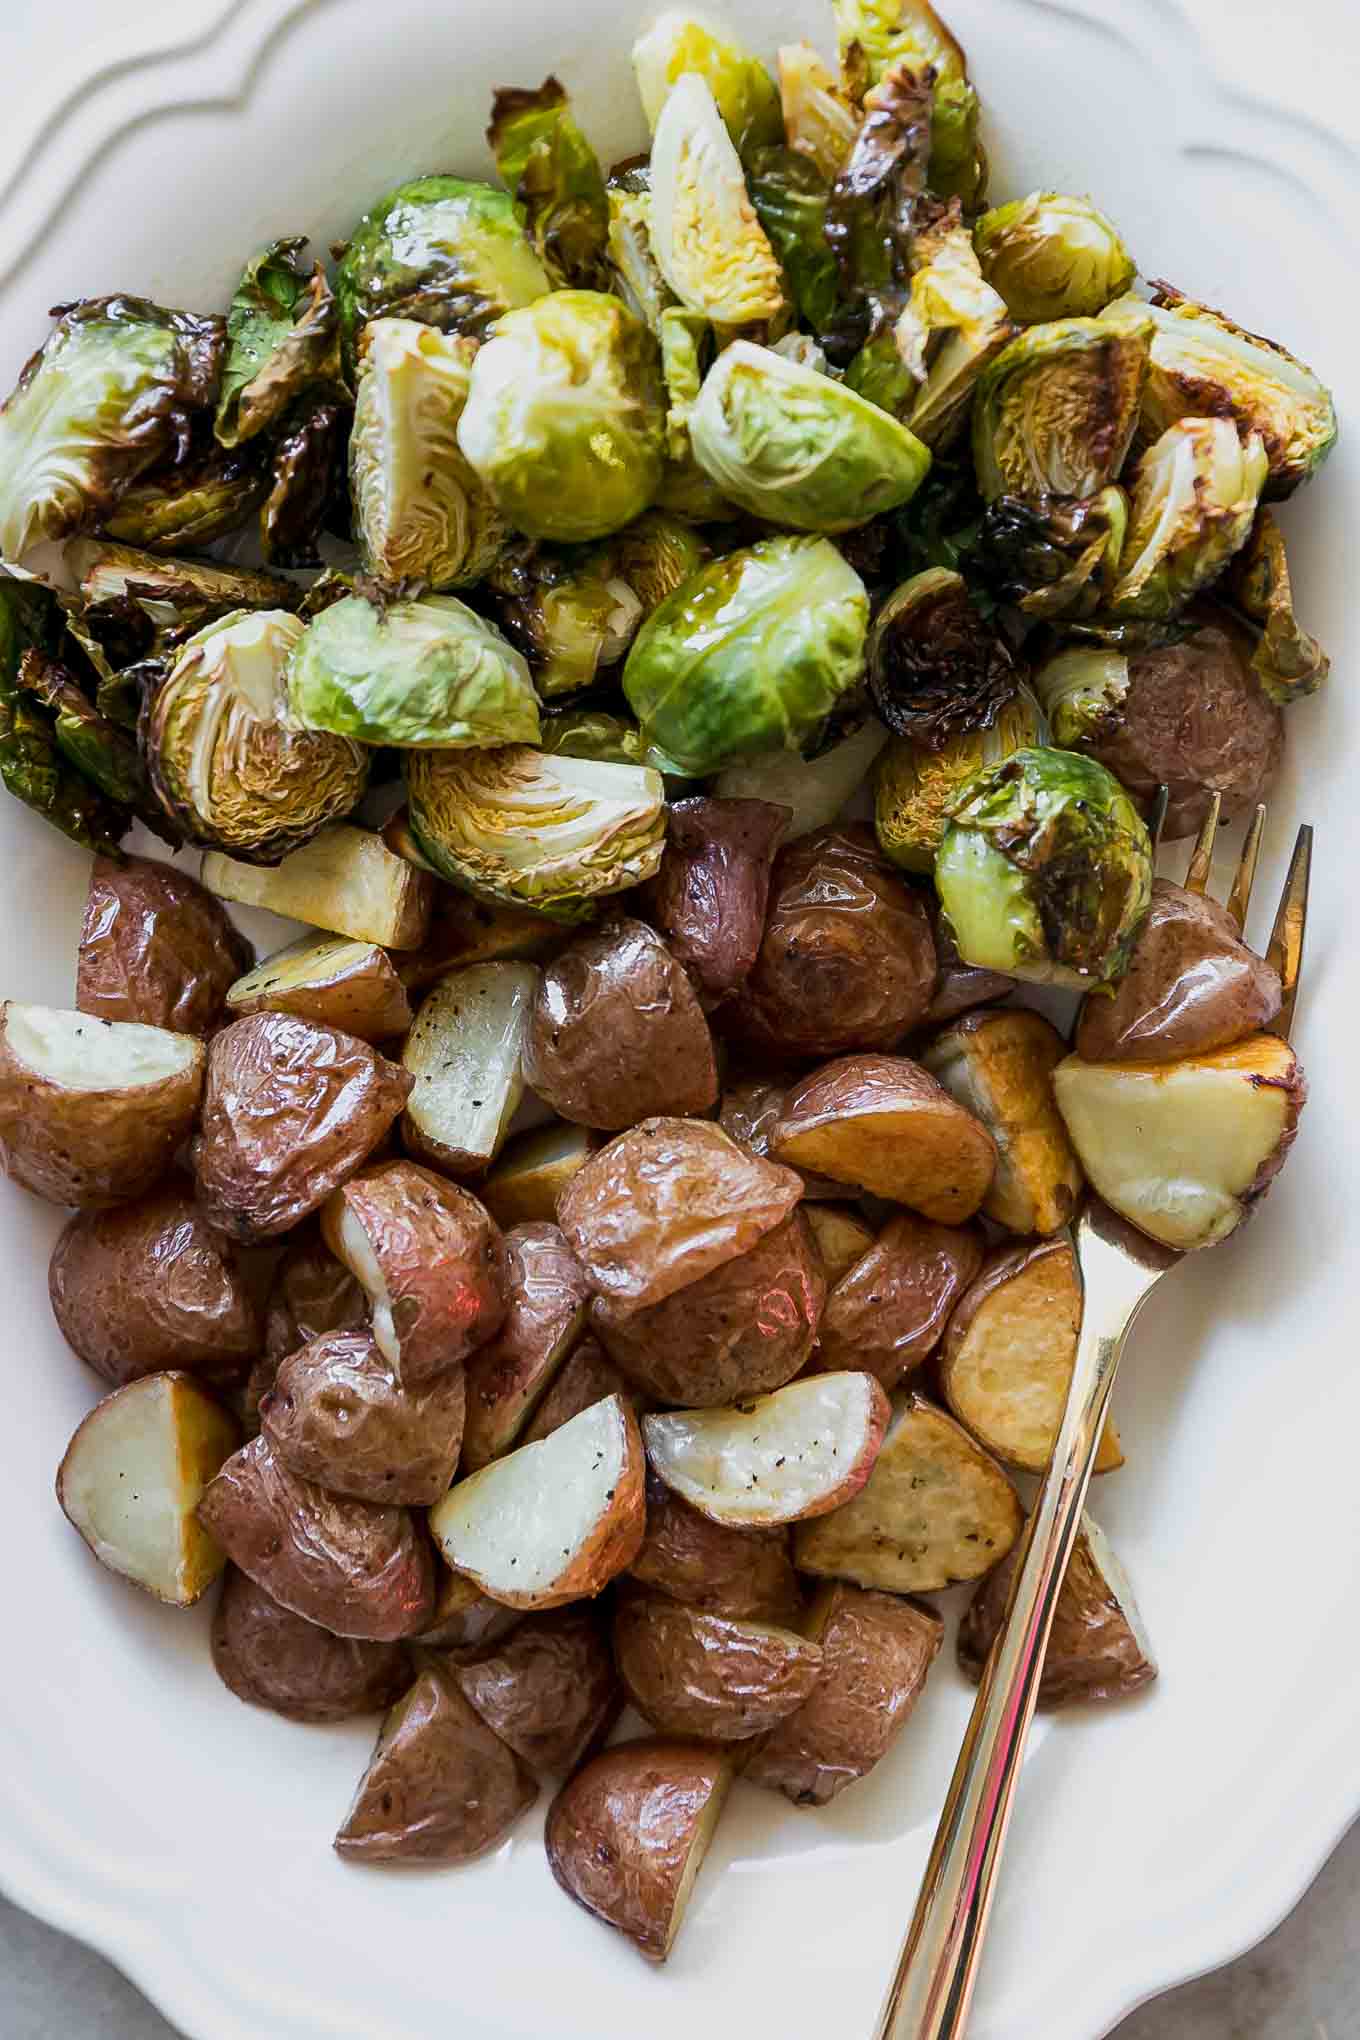 a close up photo of brussels sprouts and potatoes on a white plate